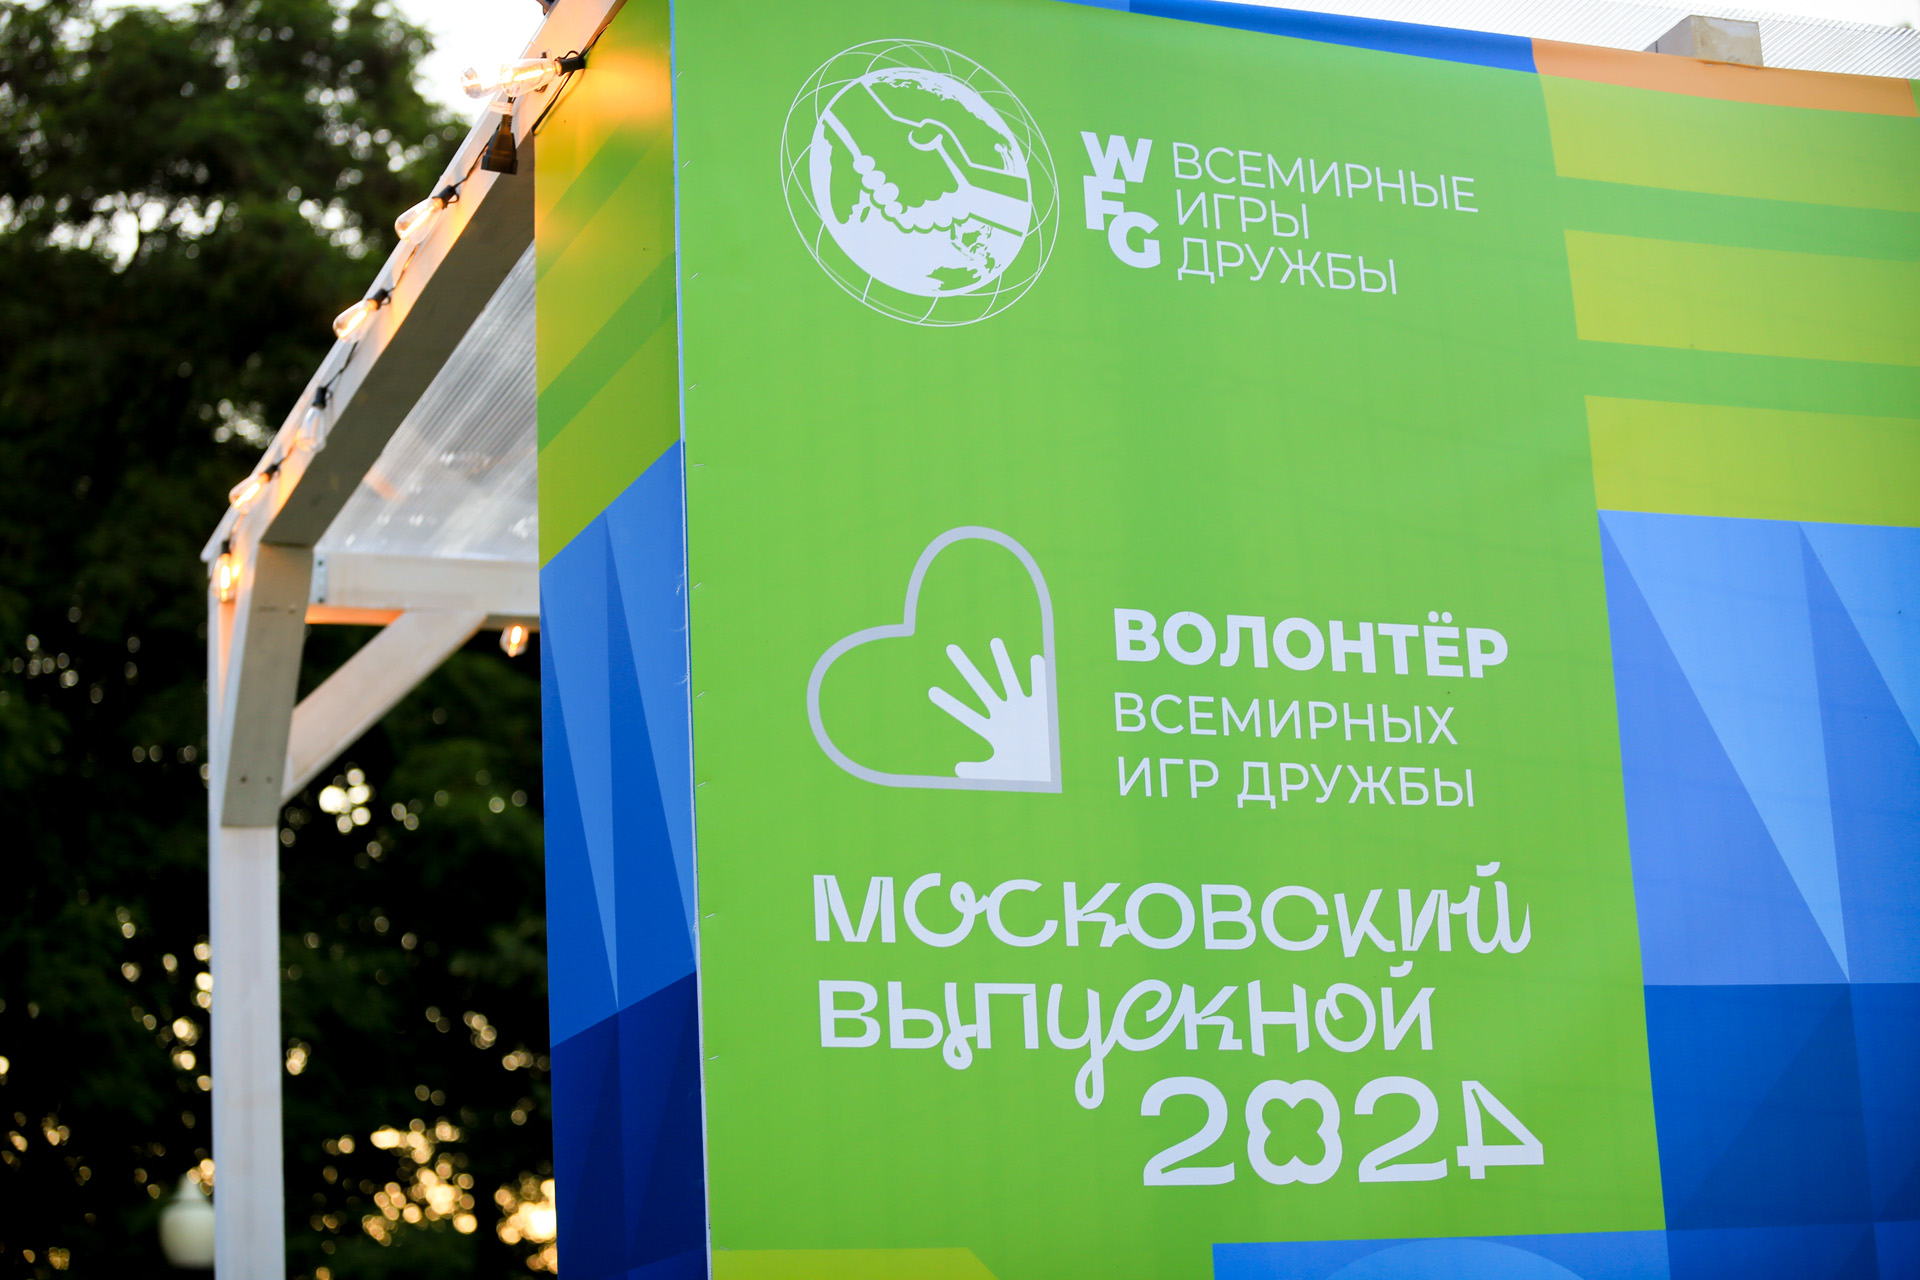 The World Friendship Games at the Moscow School Leavers Festival and All-Russian Youth Day celebrations